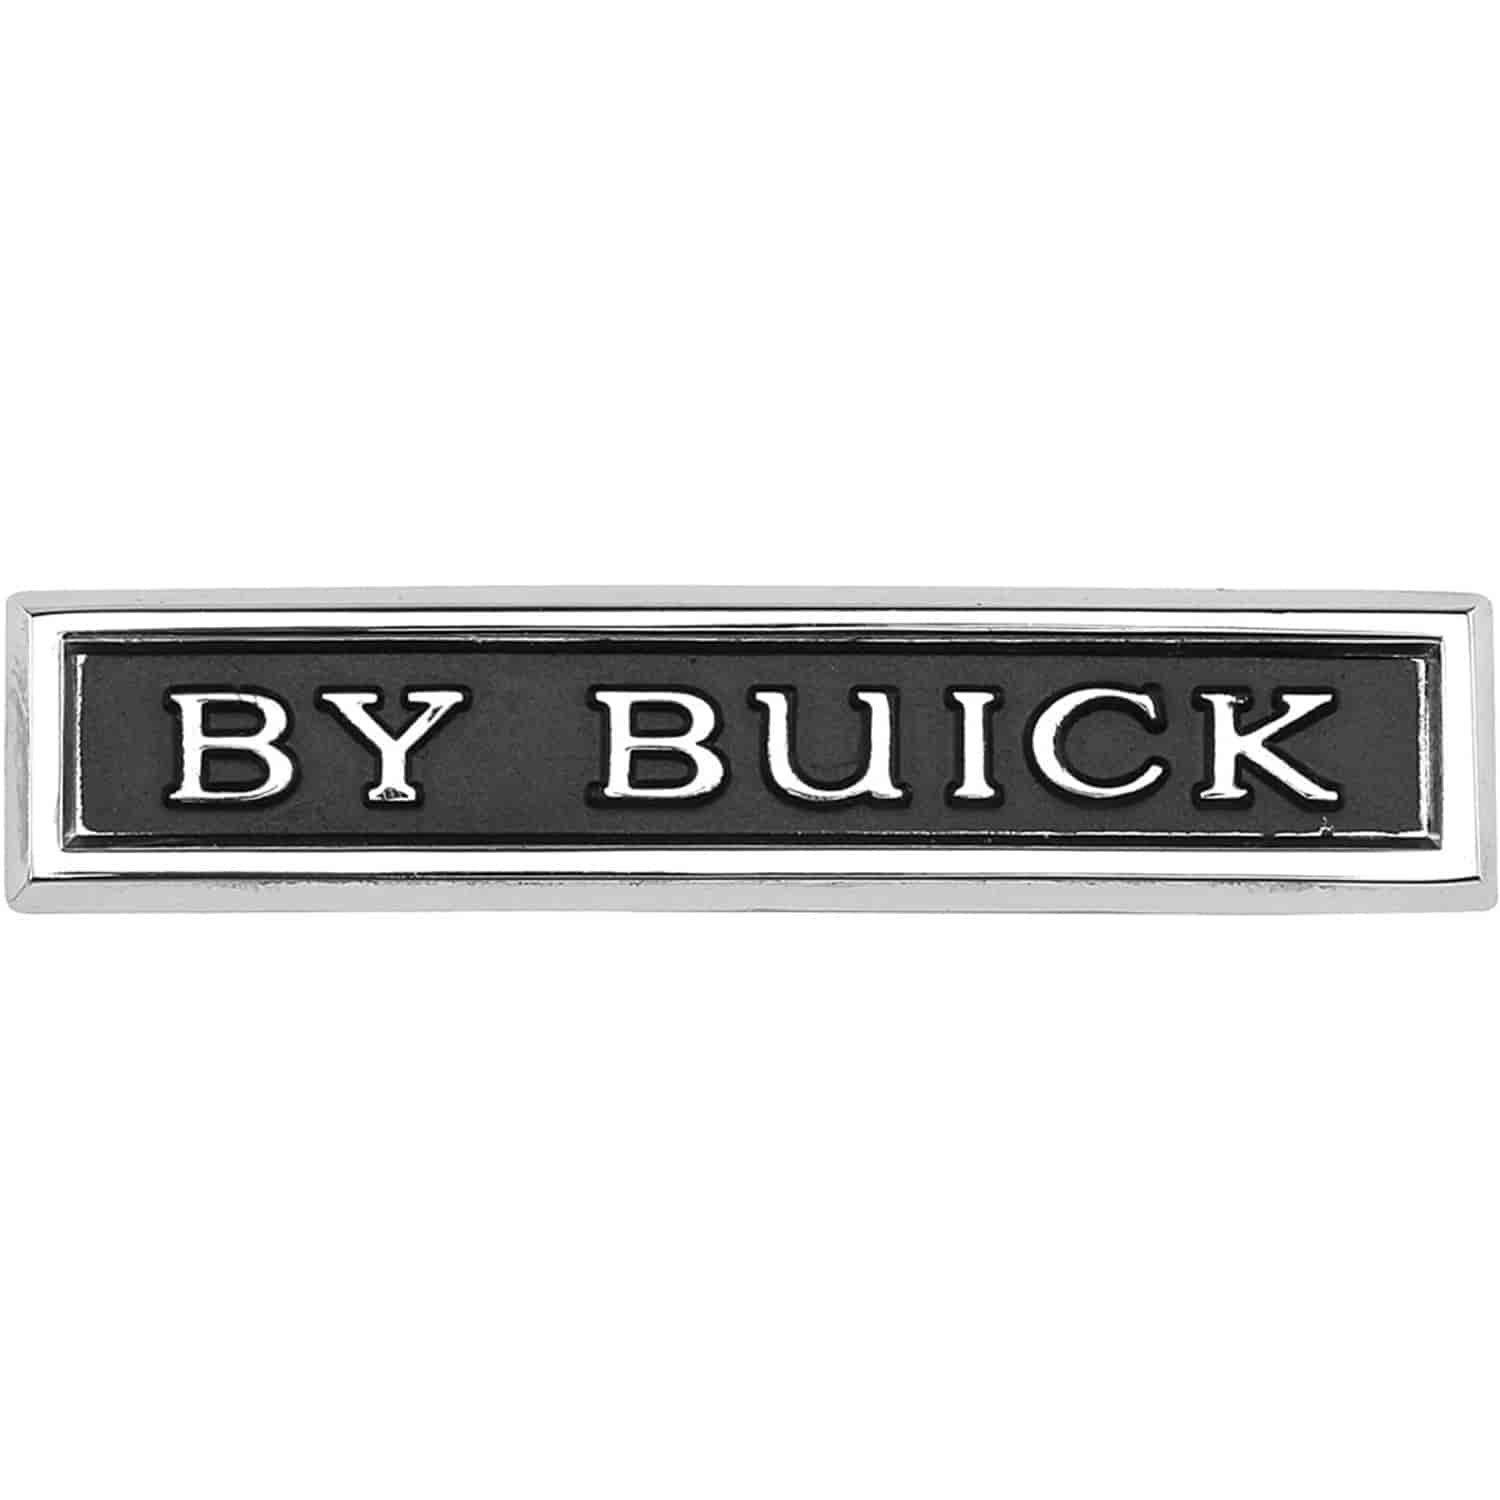 Emblem Trunk 1966-67 Riviera By Buick